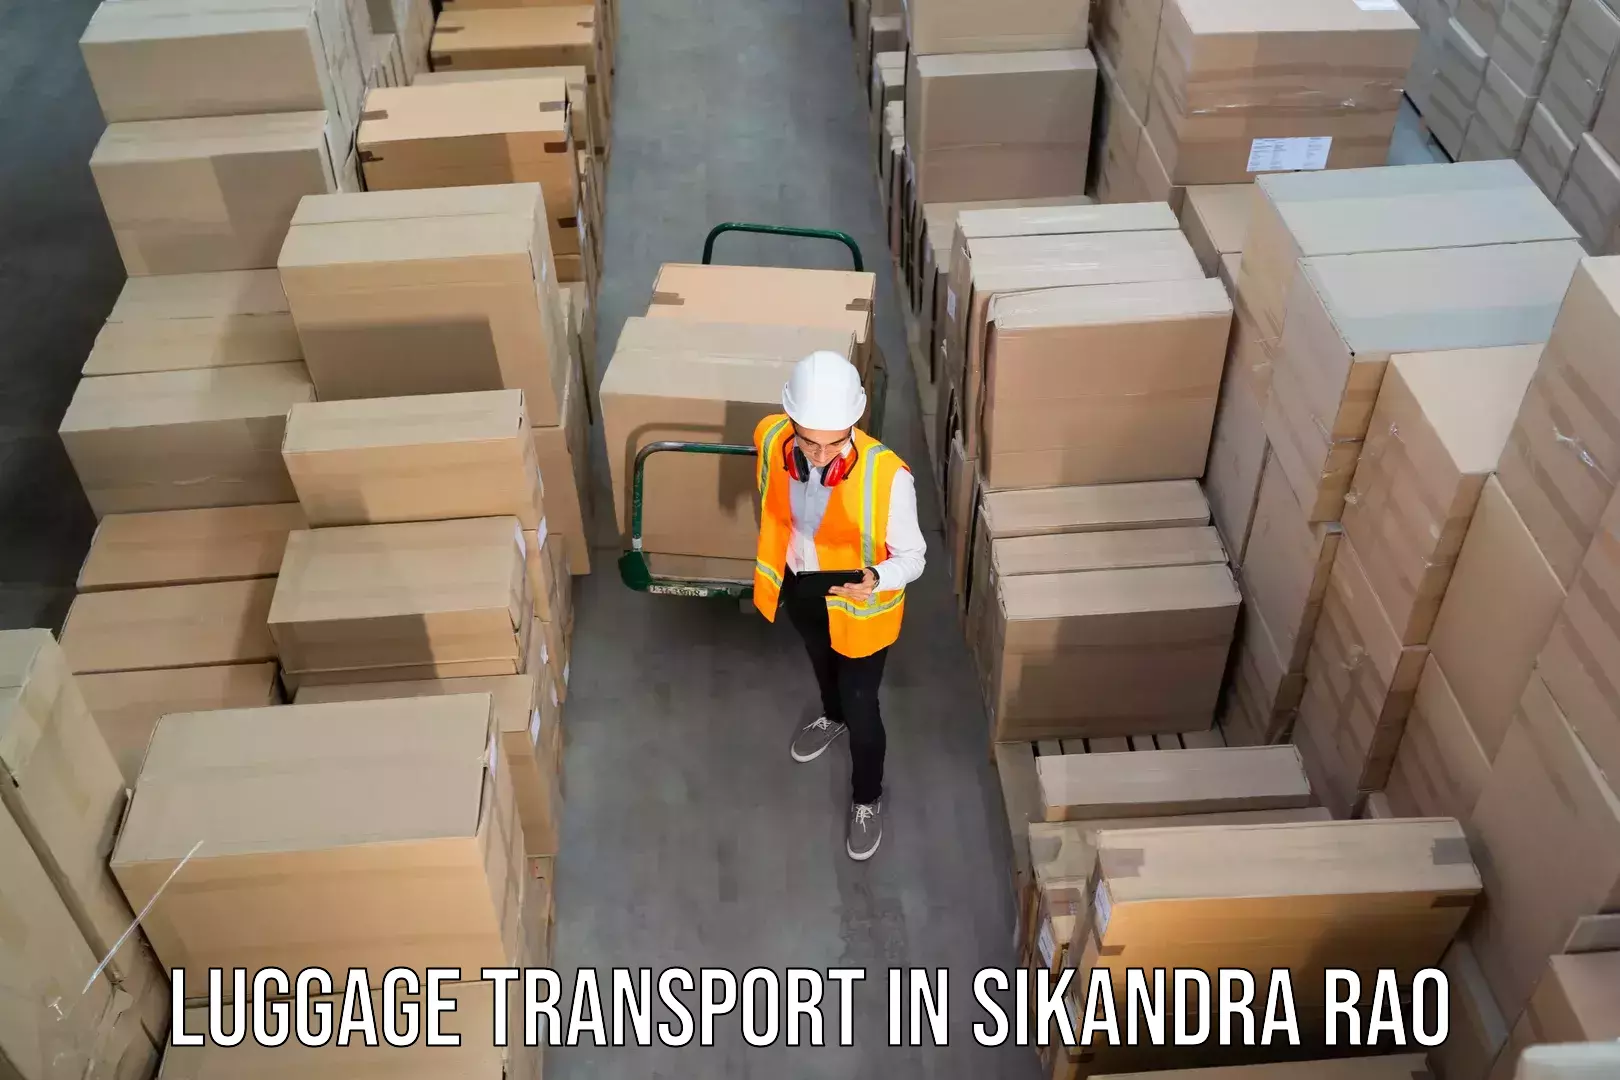 Luggage transport solutions in Sikandra Rao